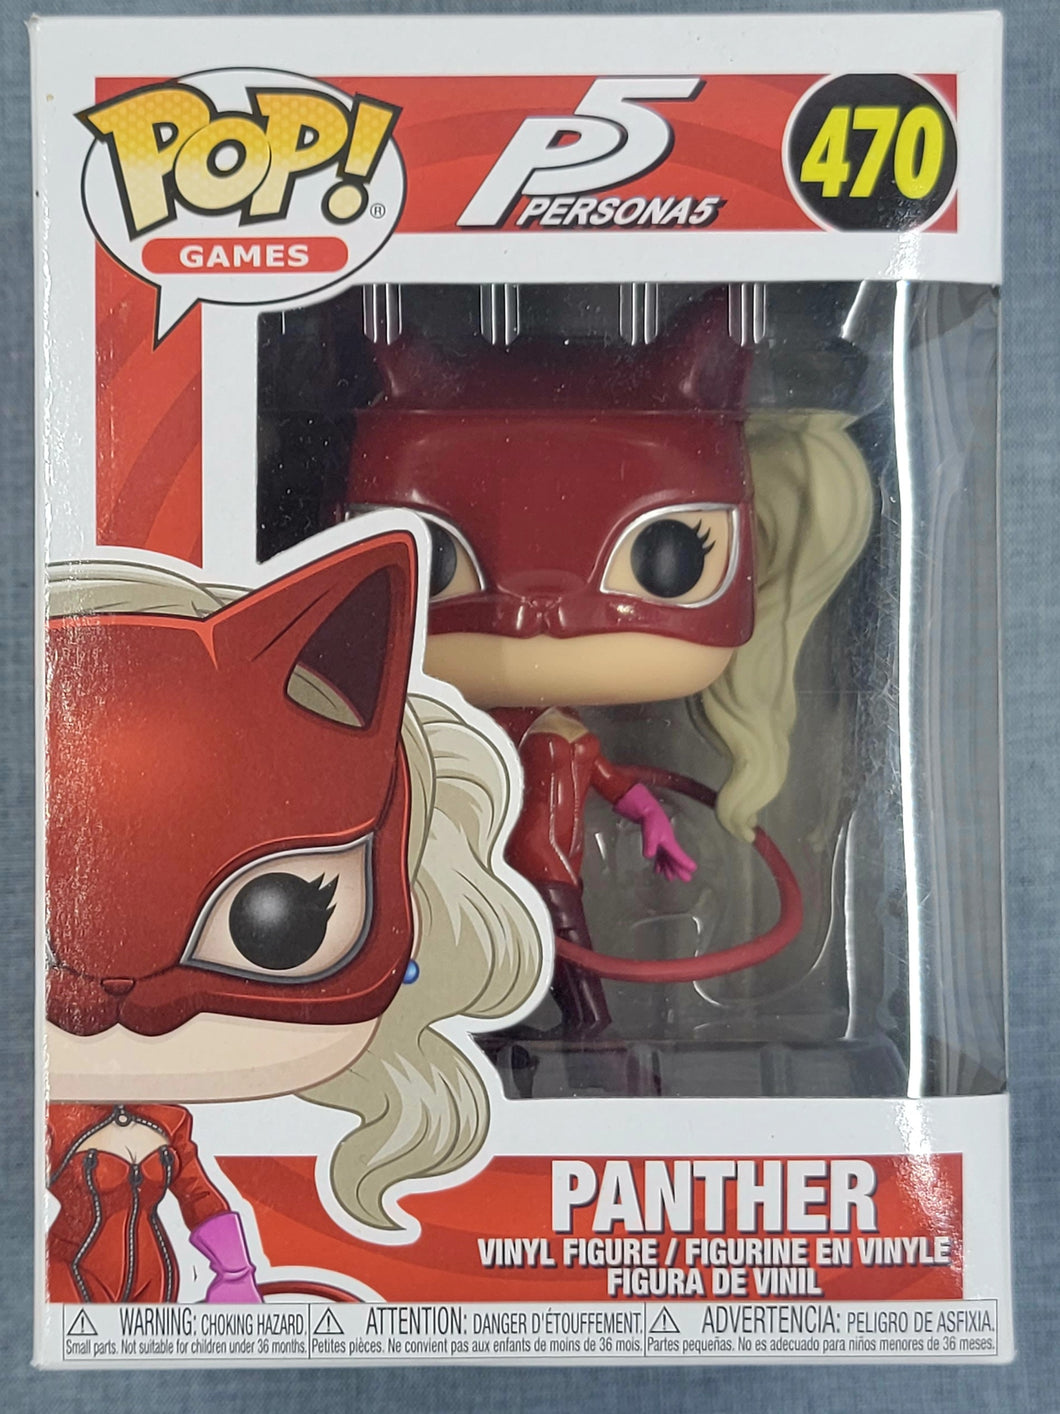 POP! GAMES PERSONA 5 PANTHER #470